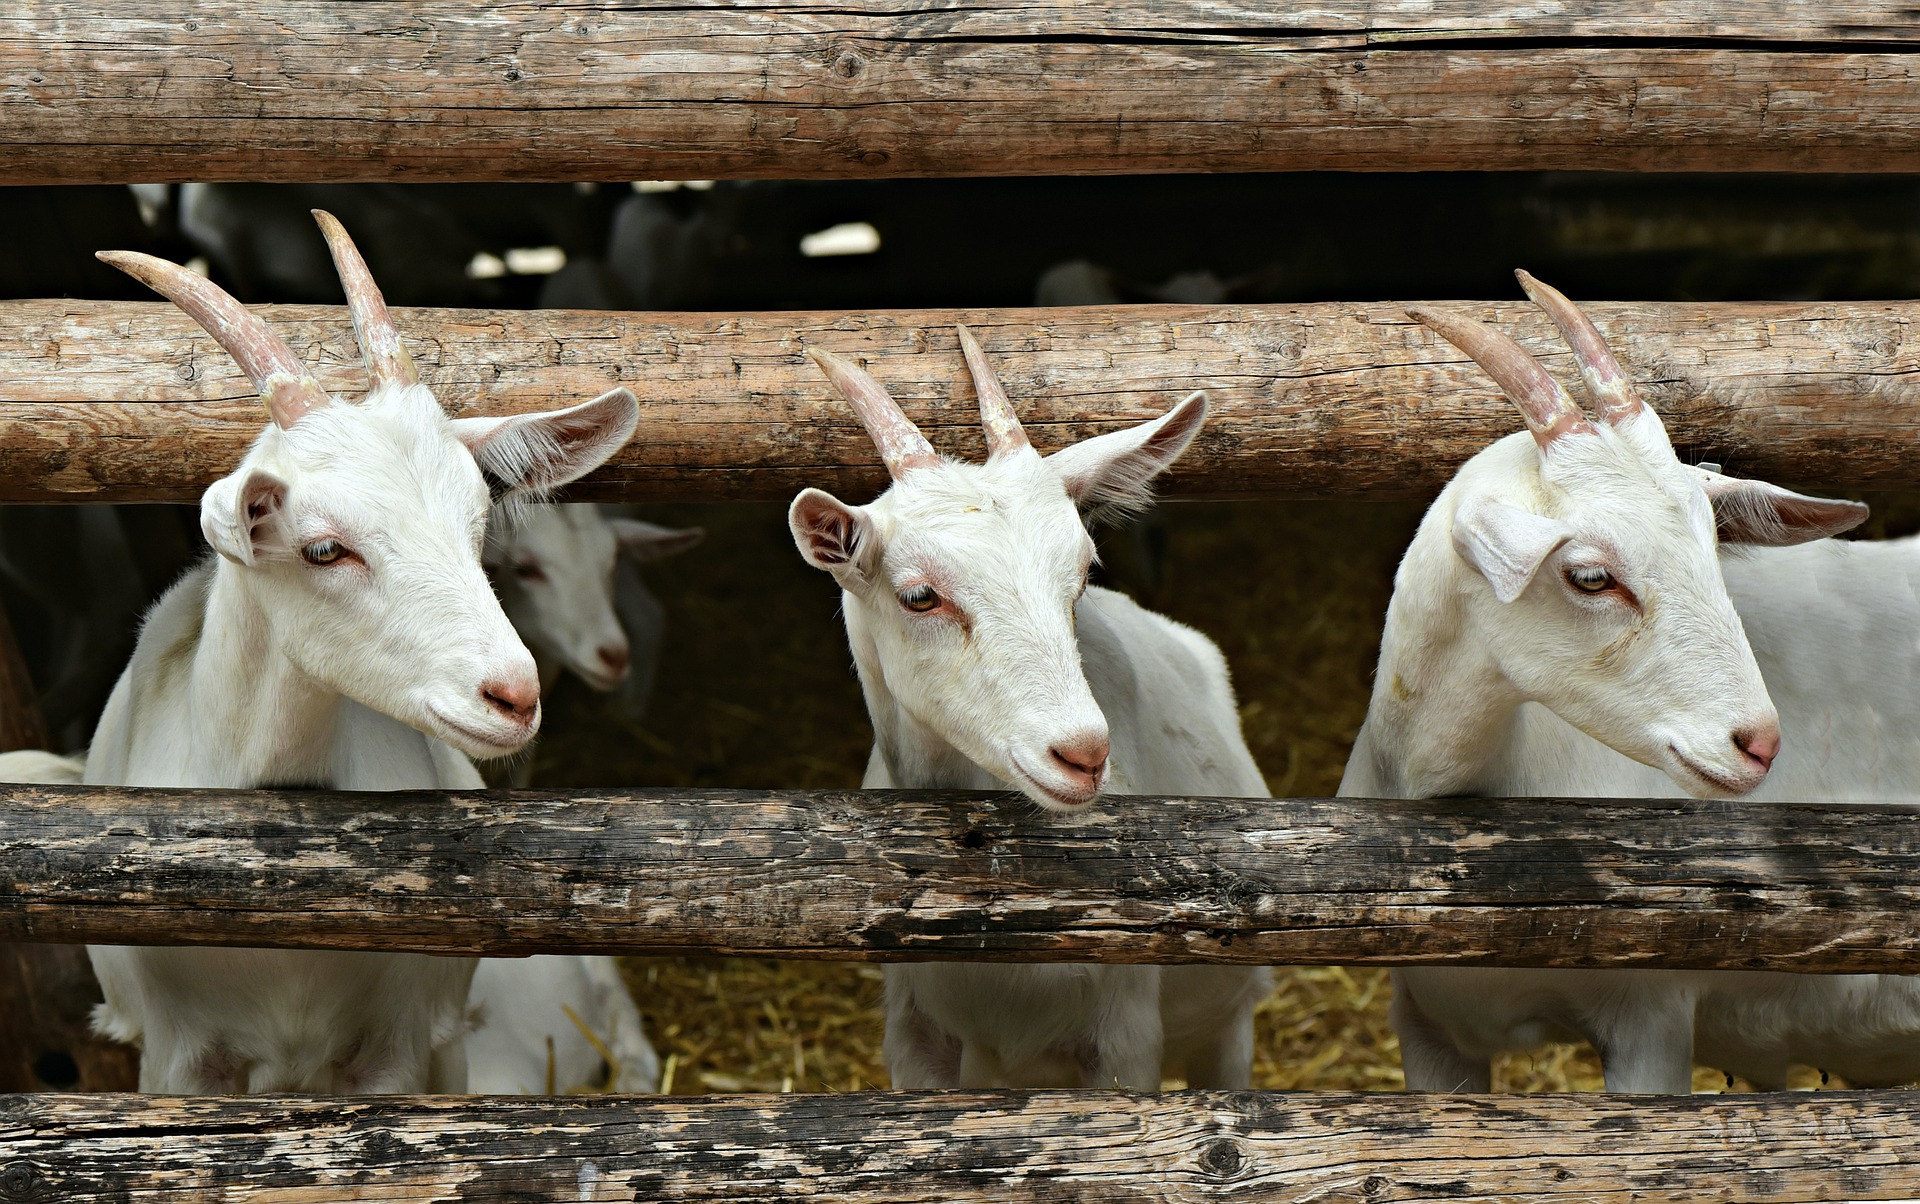 Goats and Uniforms? Oh My!